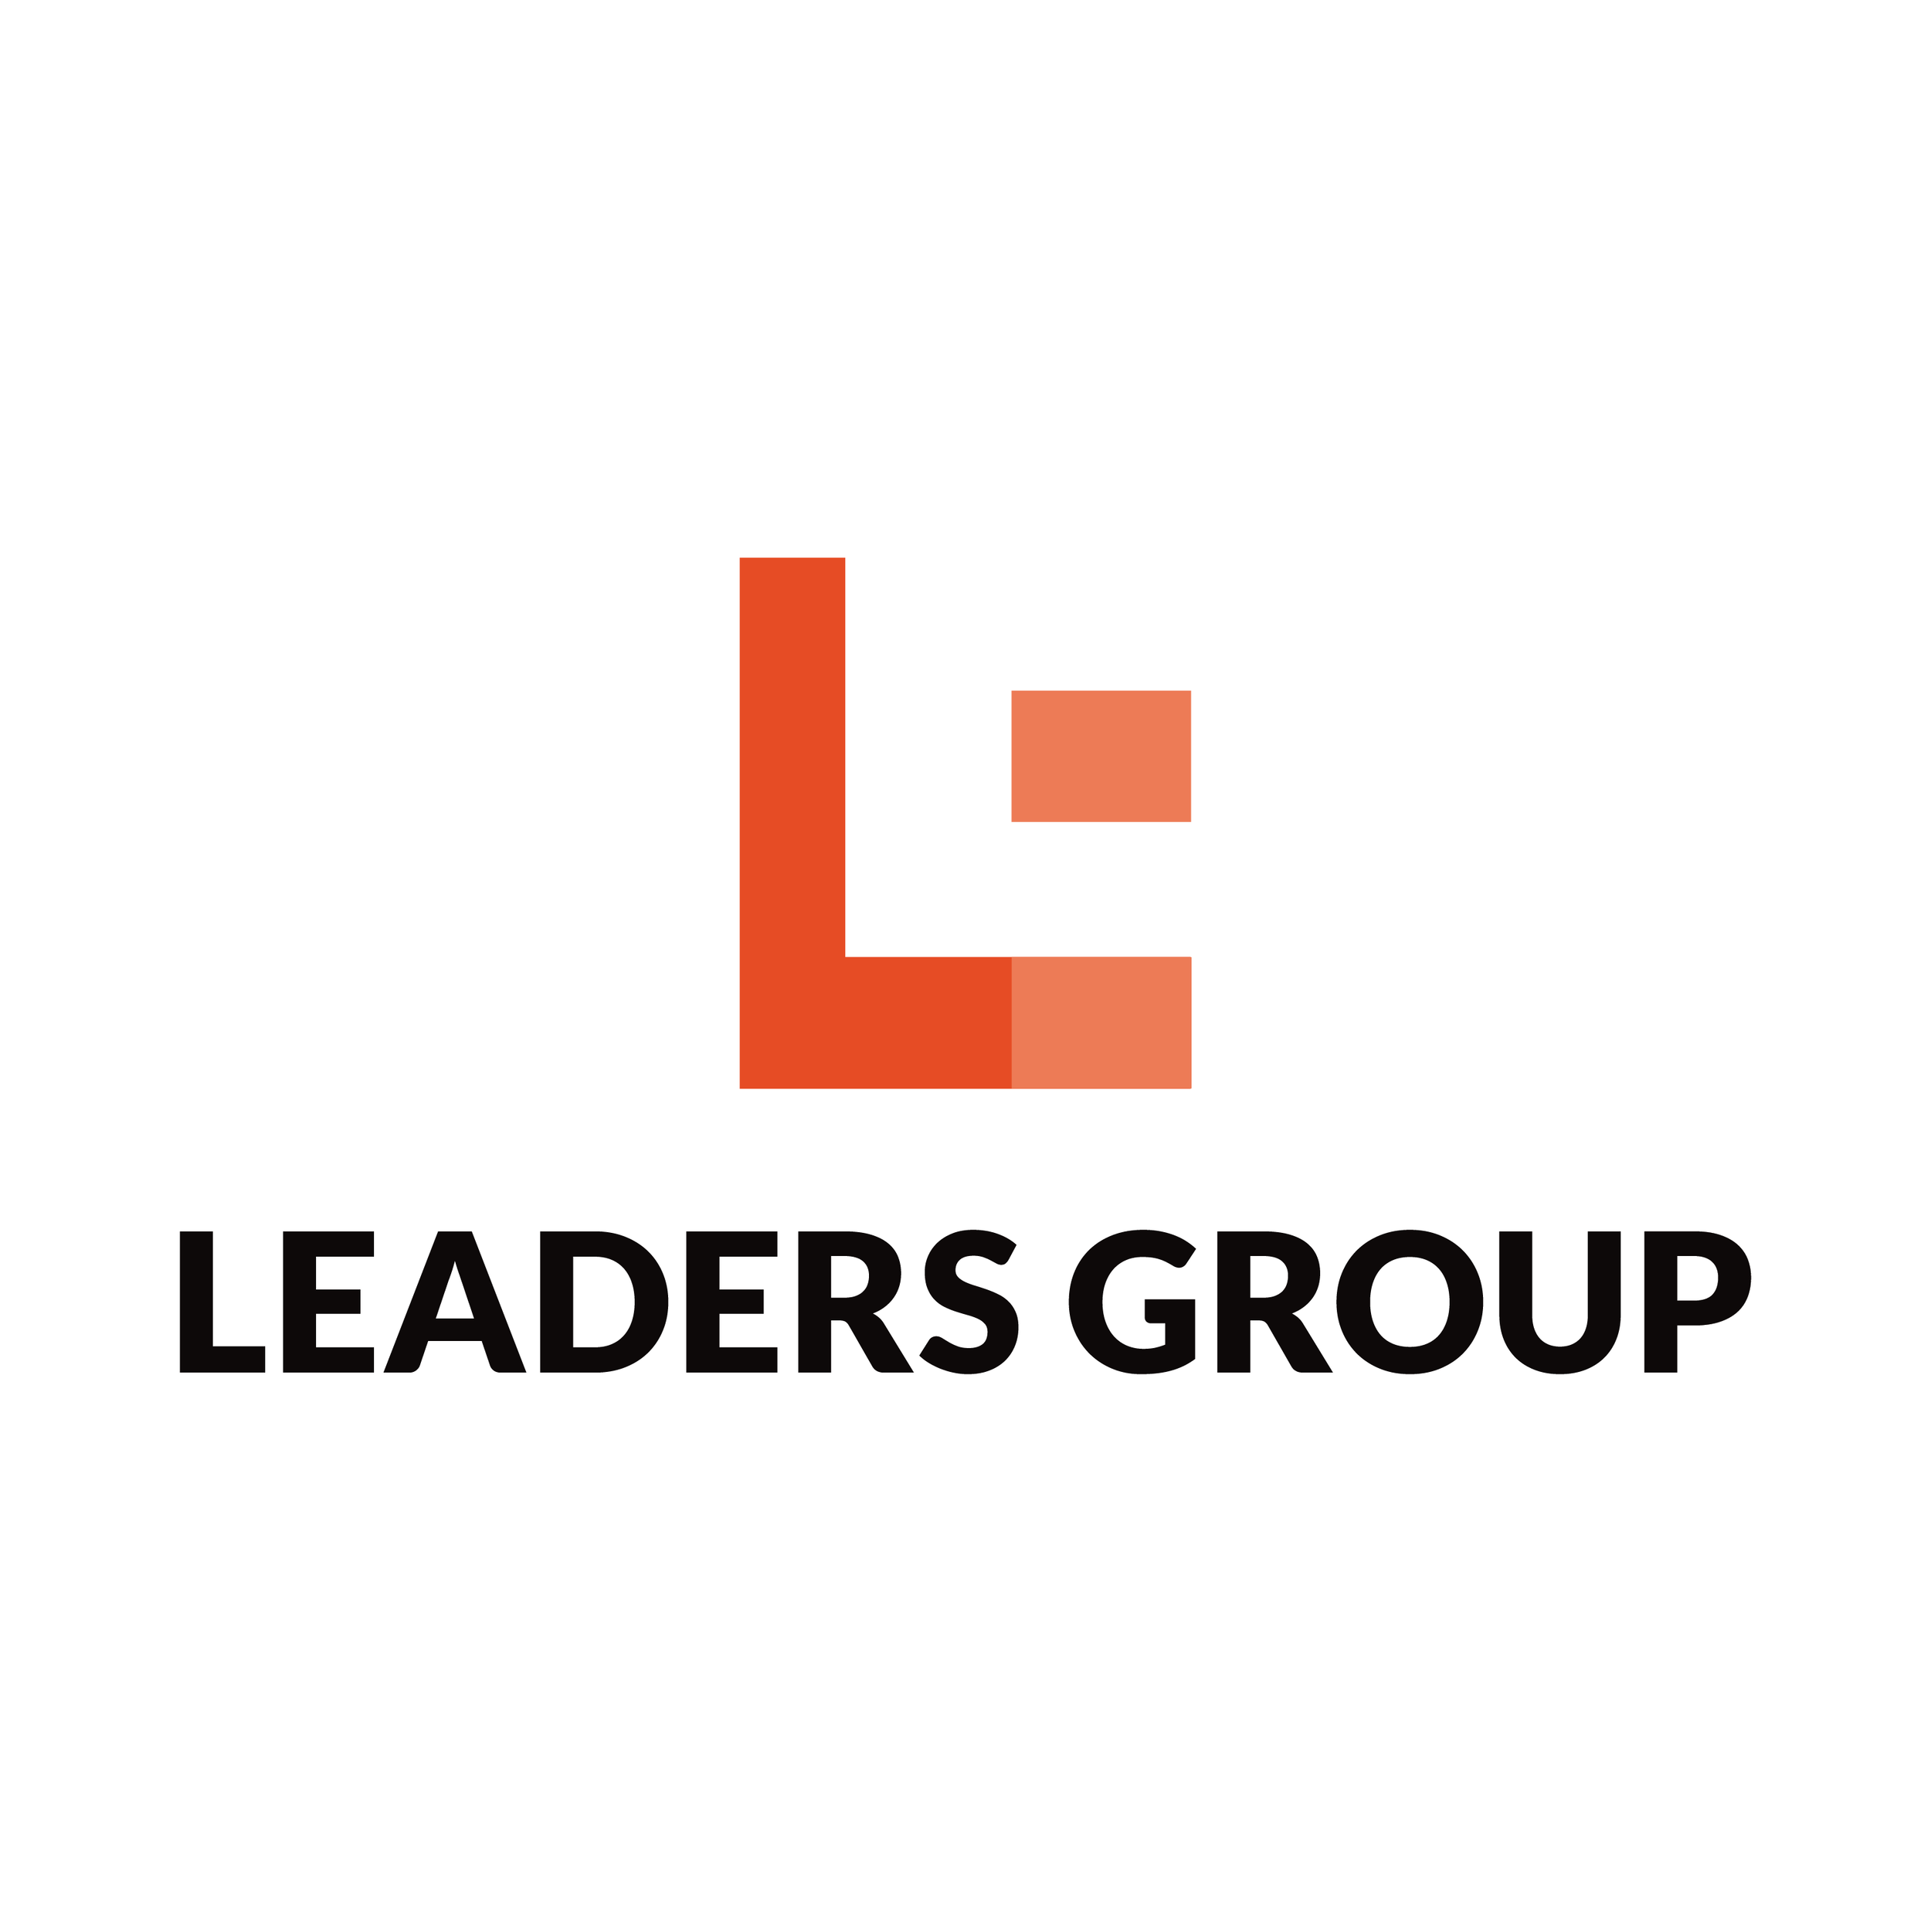 Leaders Group - Market Intelligence and Analytics, Networks